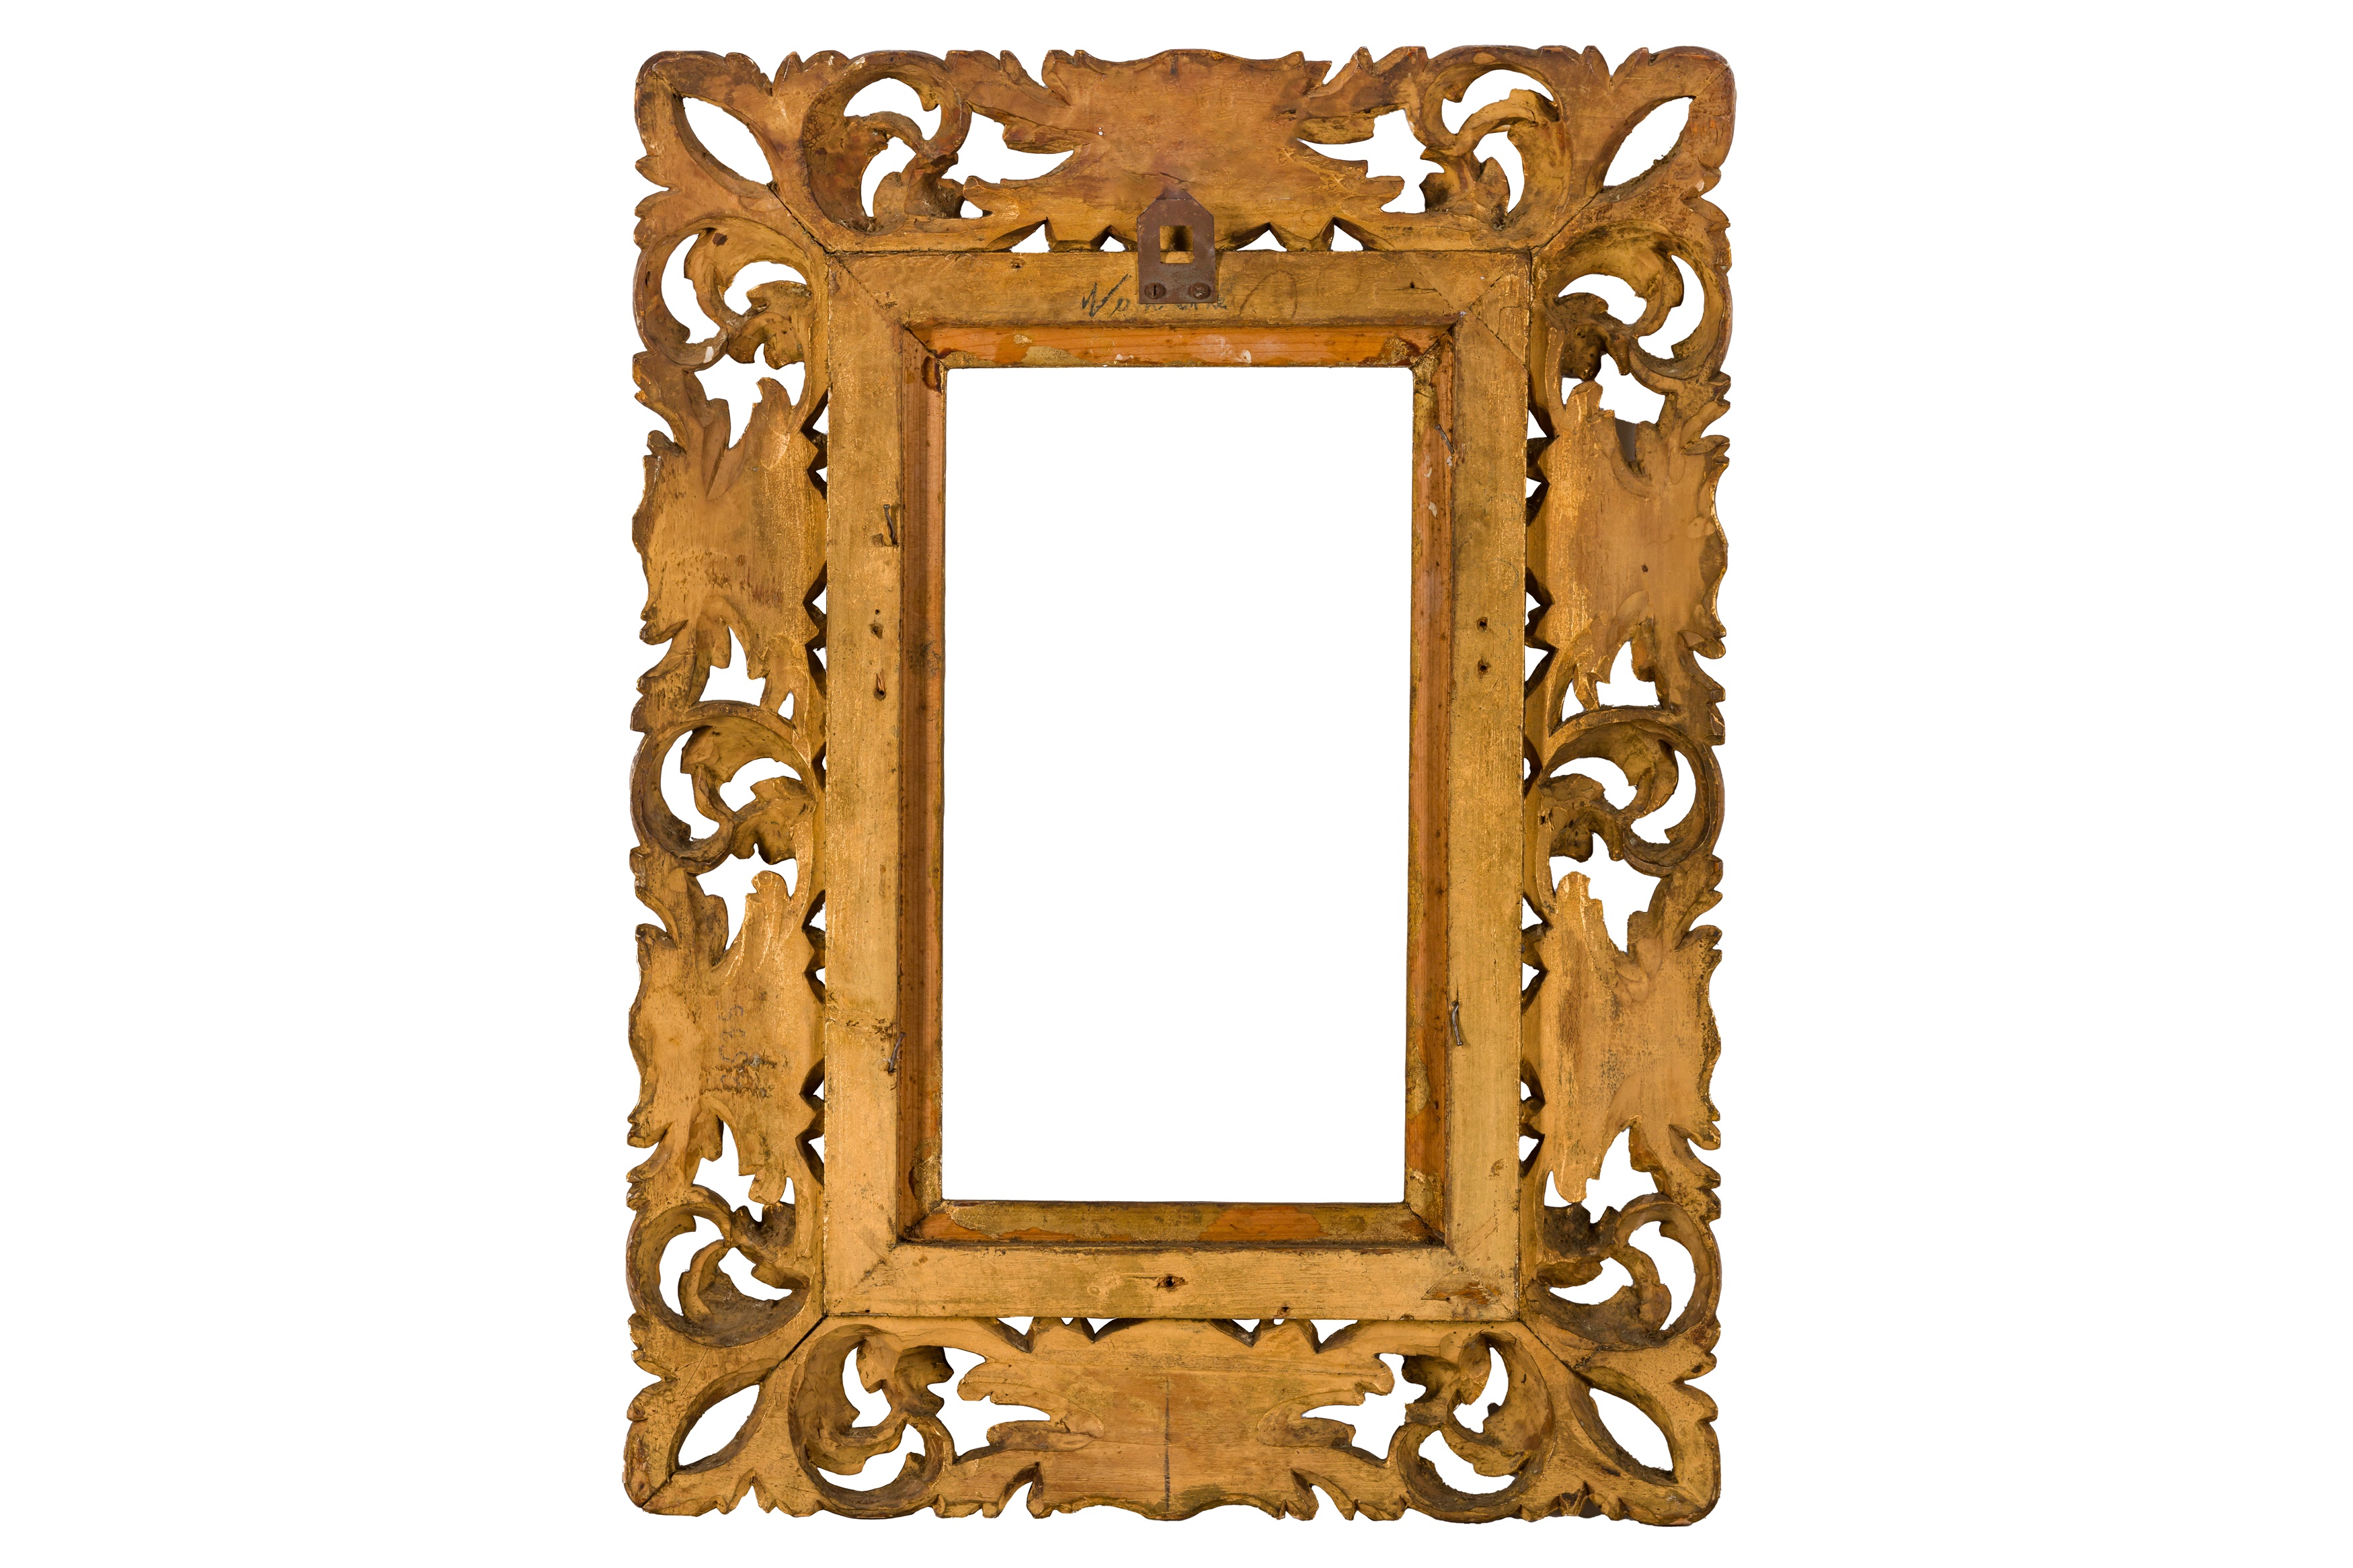 A FLORENTINE 19TH CENTURY CARVED, PIERCED, SWEPT AND GILDED FRAME - Image 3 of 4